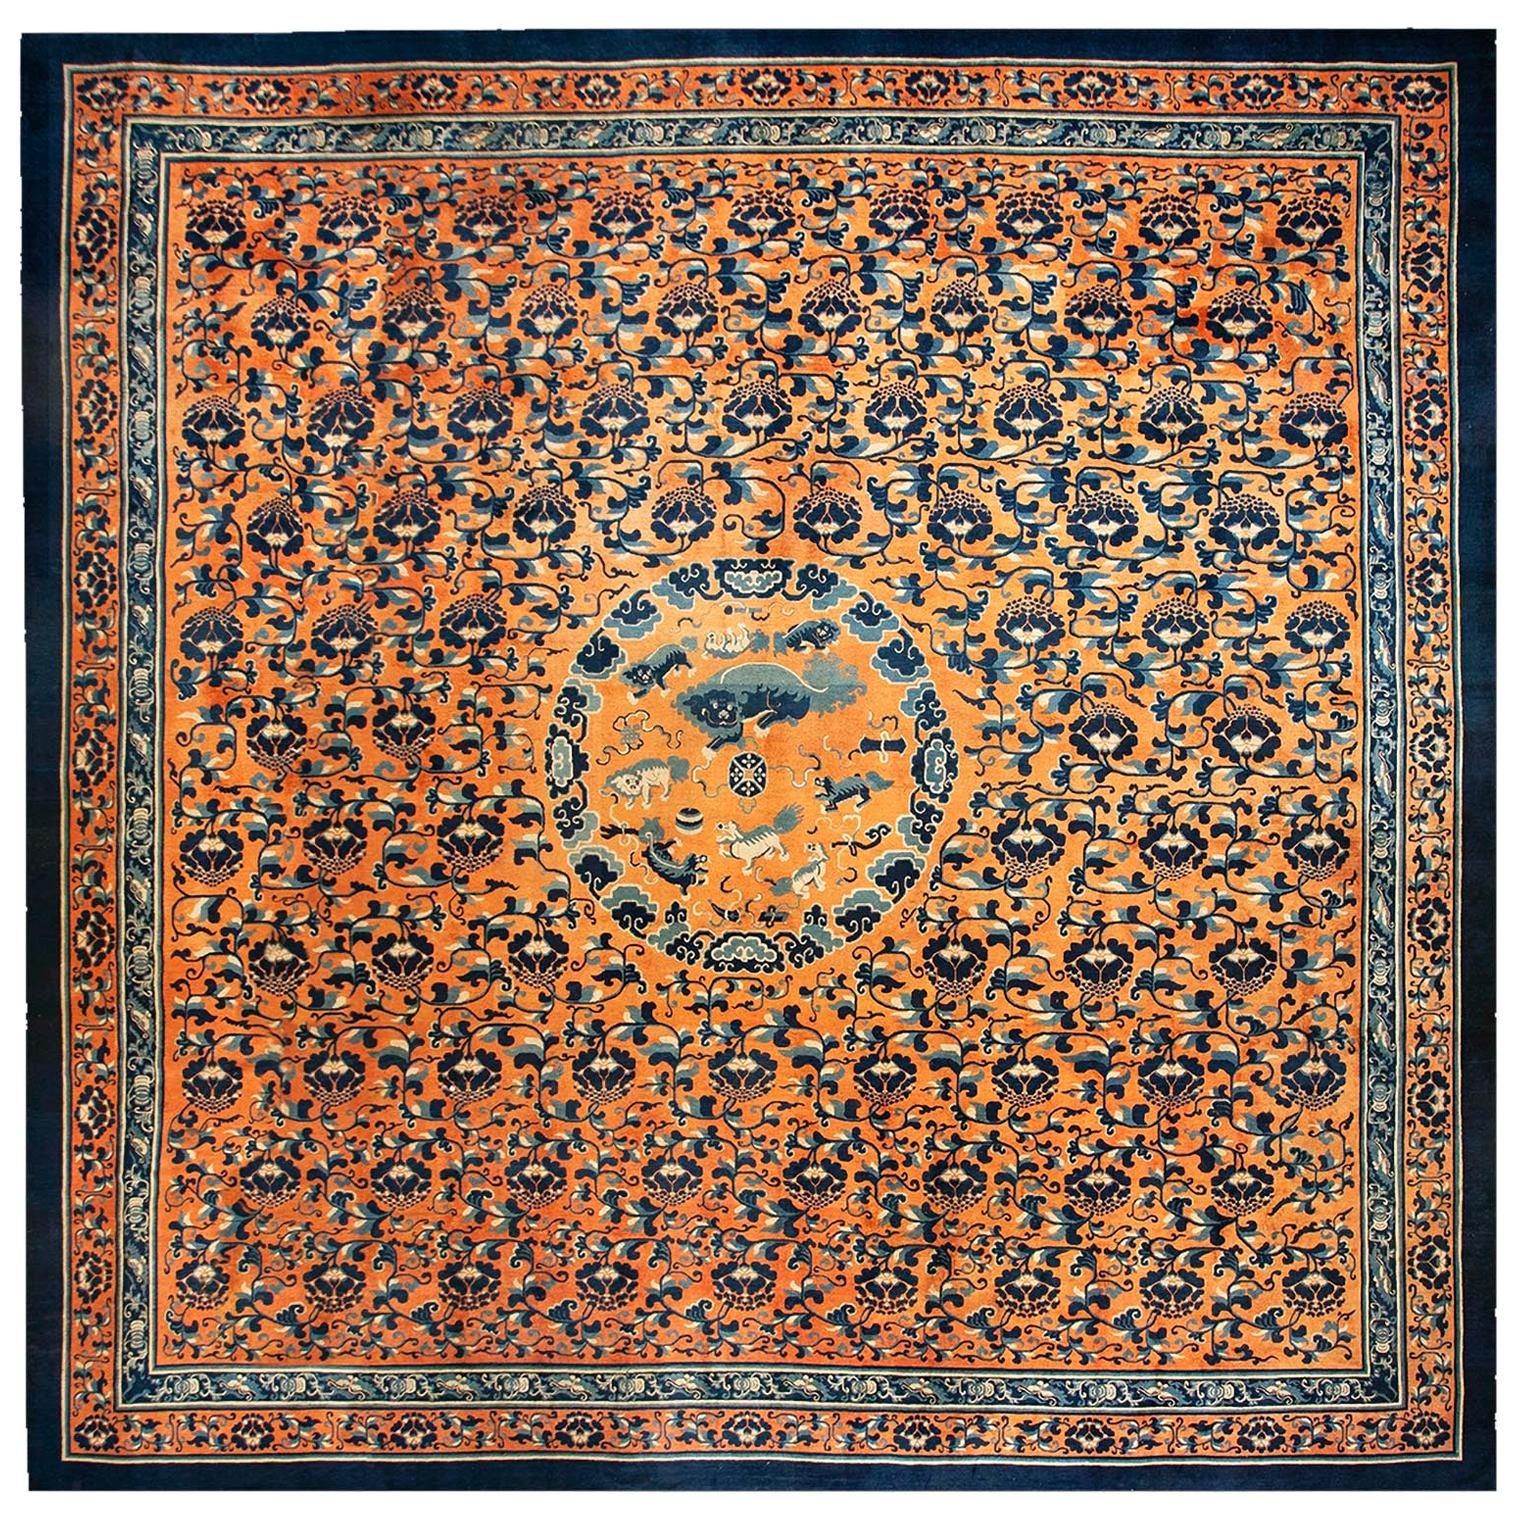 Mid 19th Century Chinese Ningxia Carpet ( 17'10" x 17'10" - 545 x 545 ) For Sale